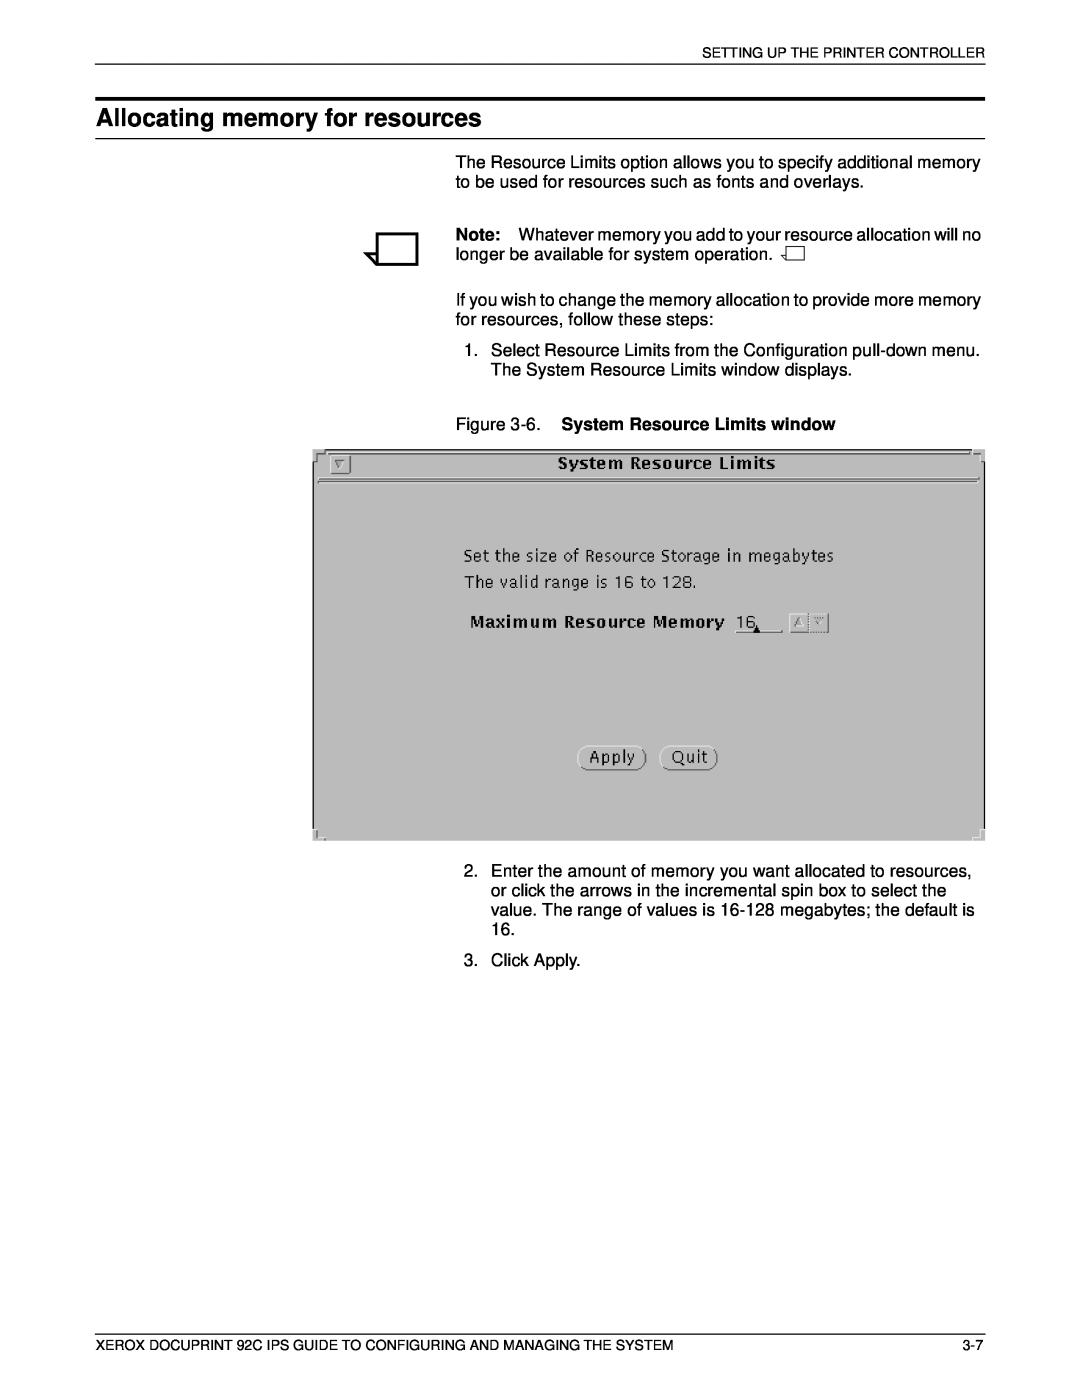 Xerox 92C IPS manual Allocating memory for resources, 6. System Resource Limits window 